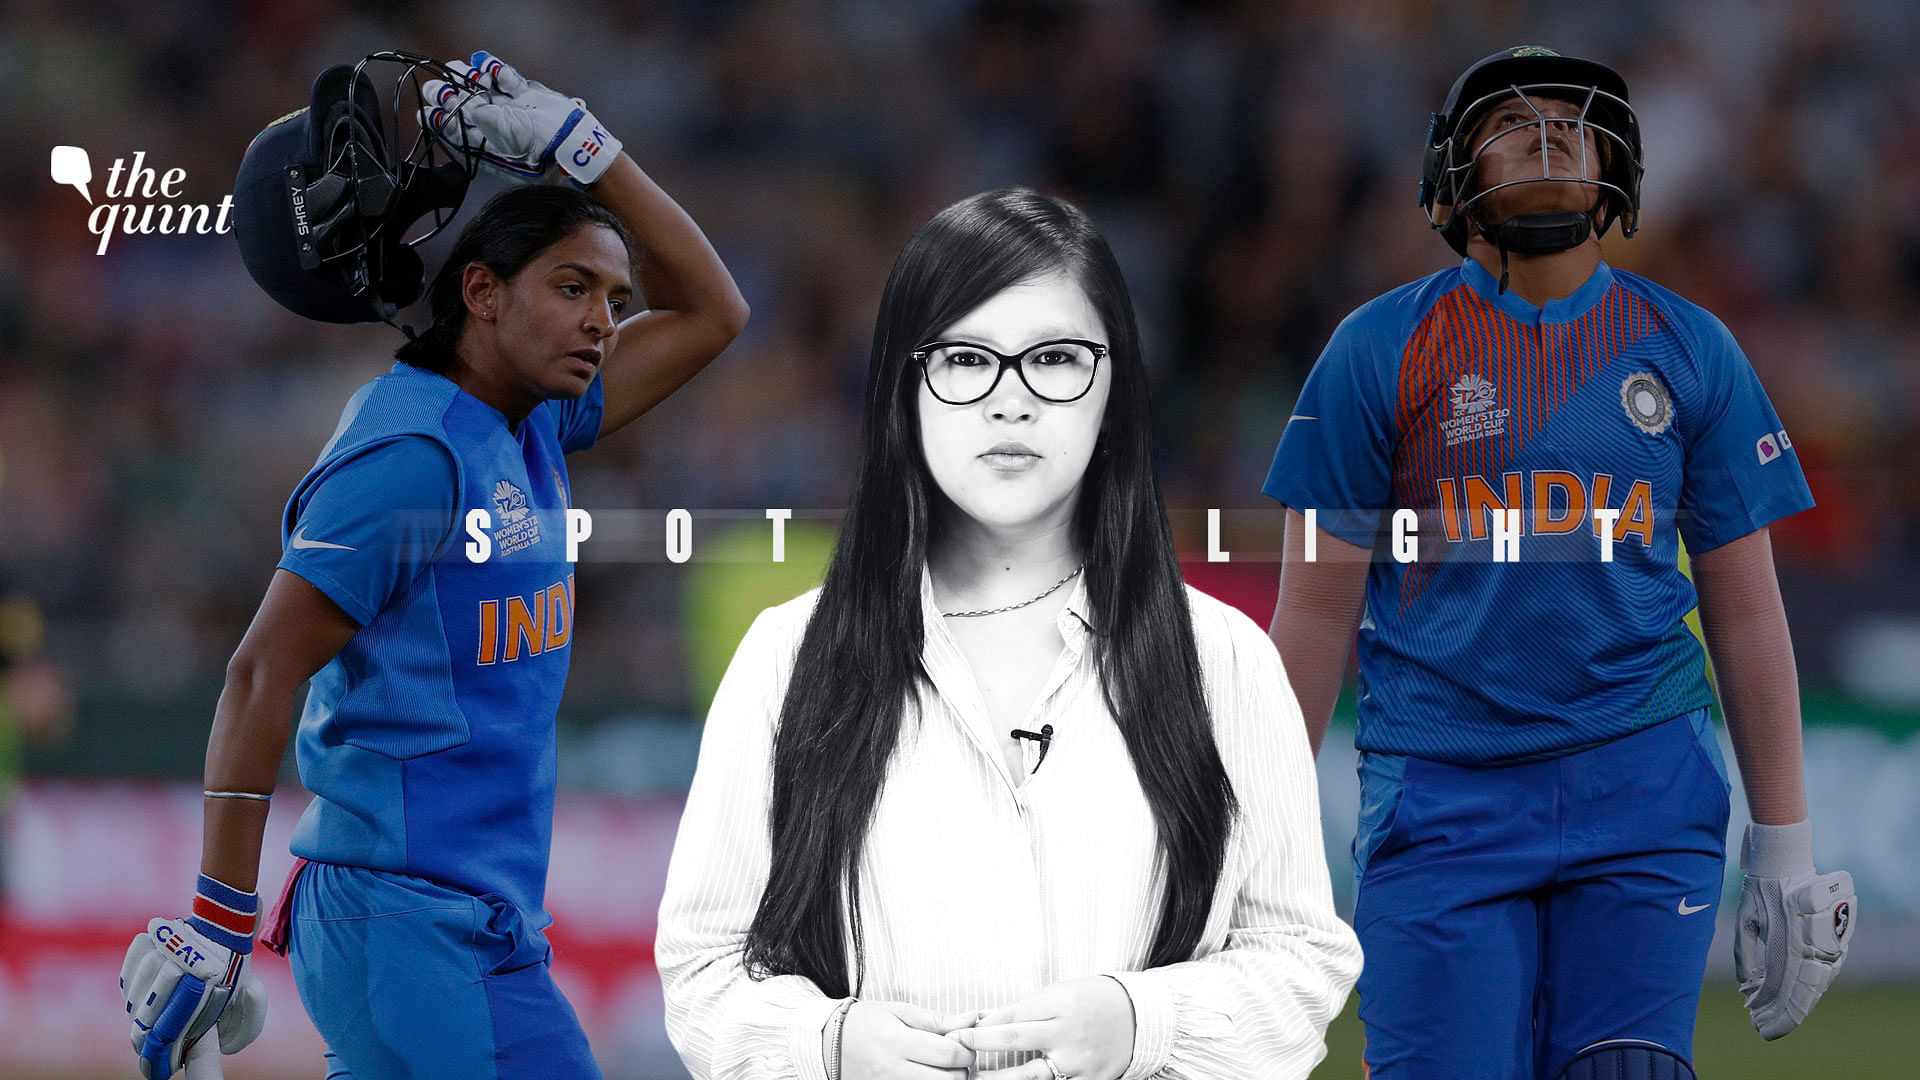 The Indian women’s cricket team have performed on the field, now it’s time for the BCCI too to step up their game.